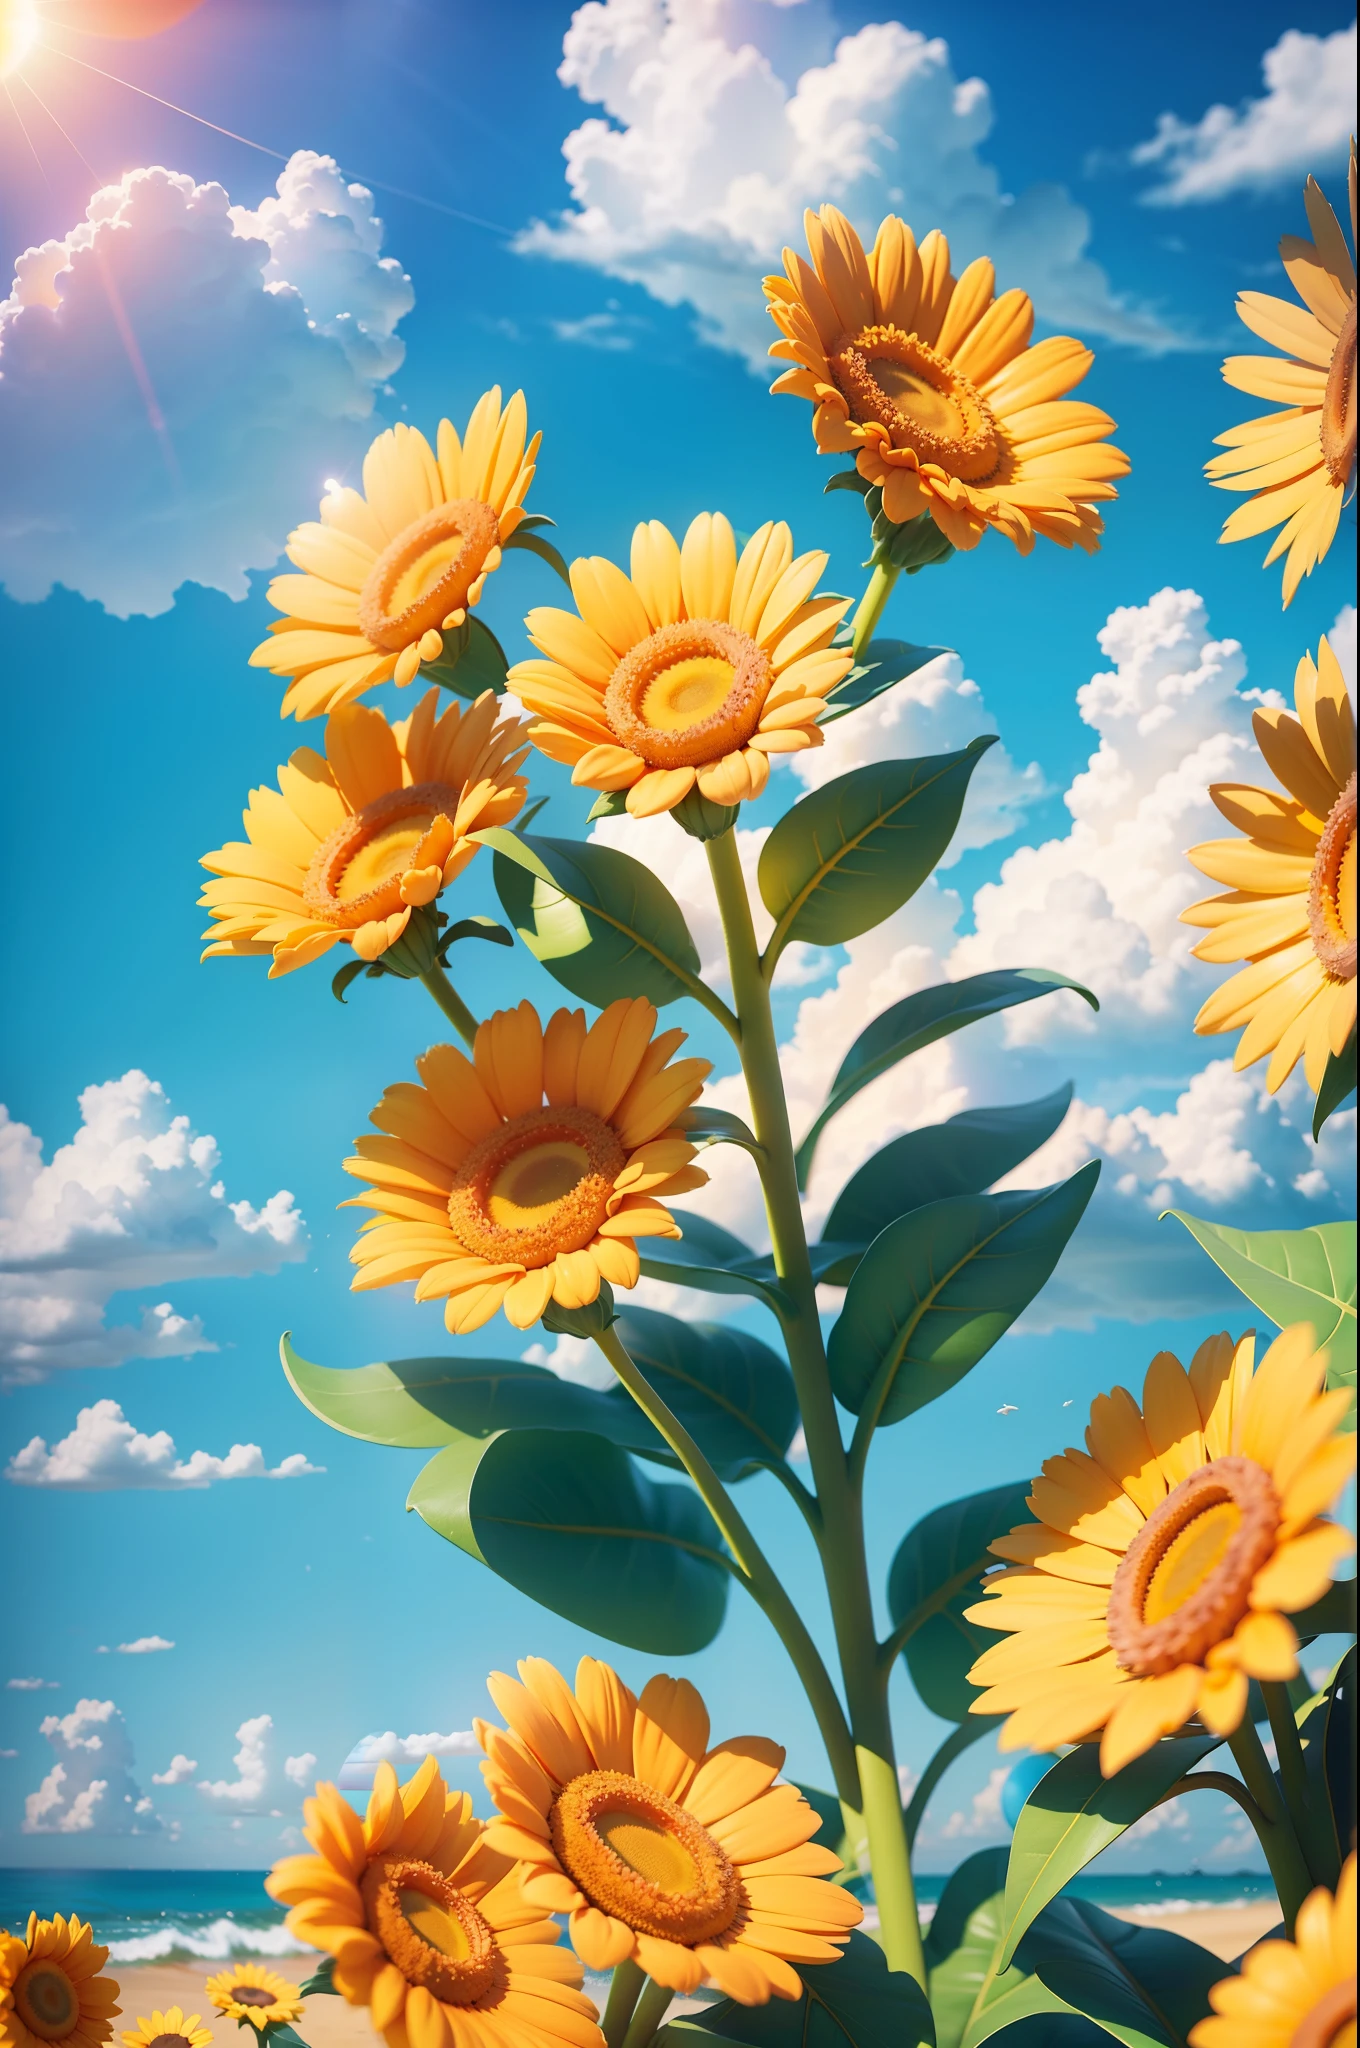 Summer clouds, small sun flowers sunny weather ,sky, sunny, colorful, happy and happy summer vacation, simple picture, close-up, brilliant sunshine, distant waves, visual impact, 3D DreamWorks style,